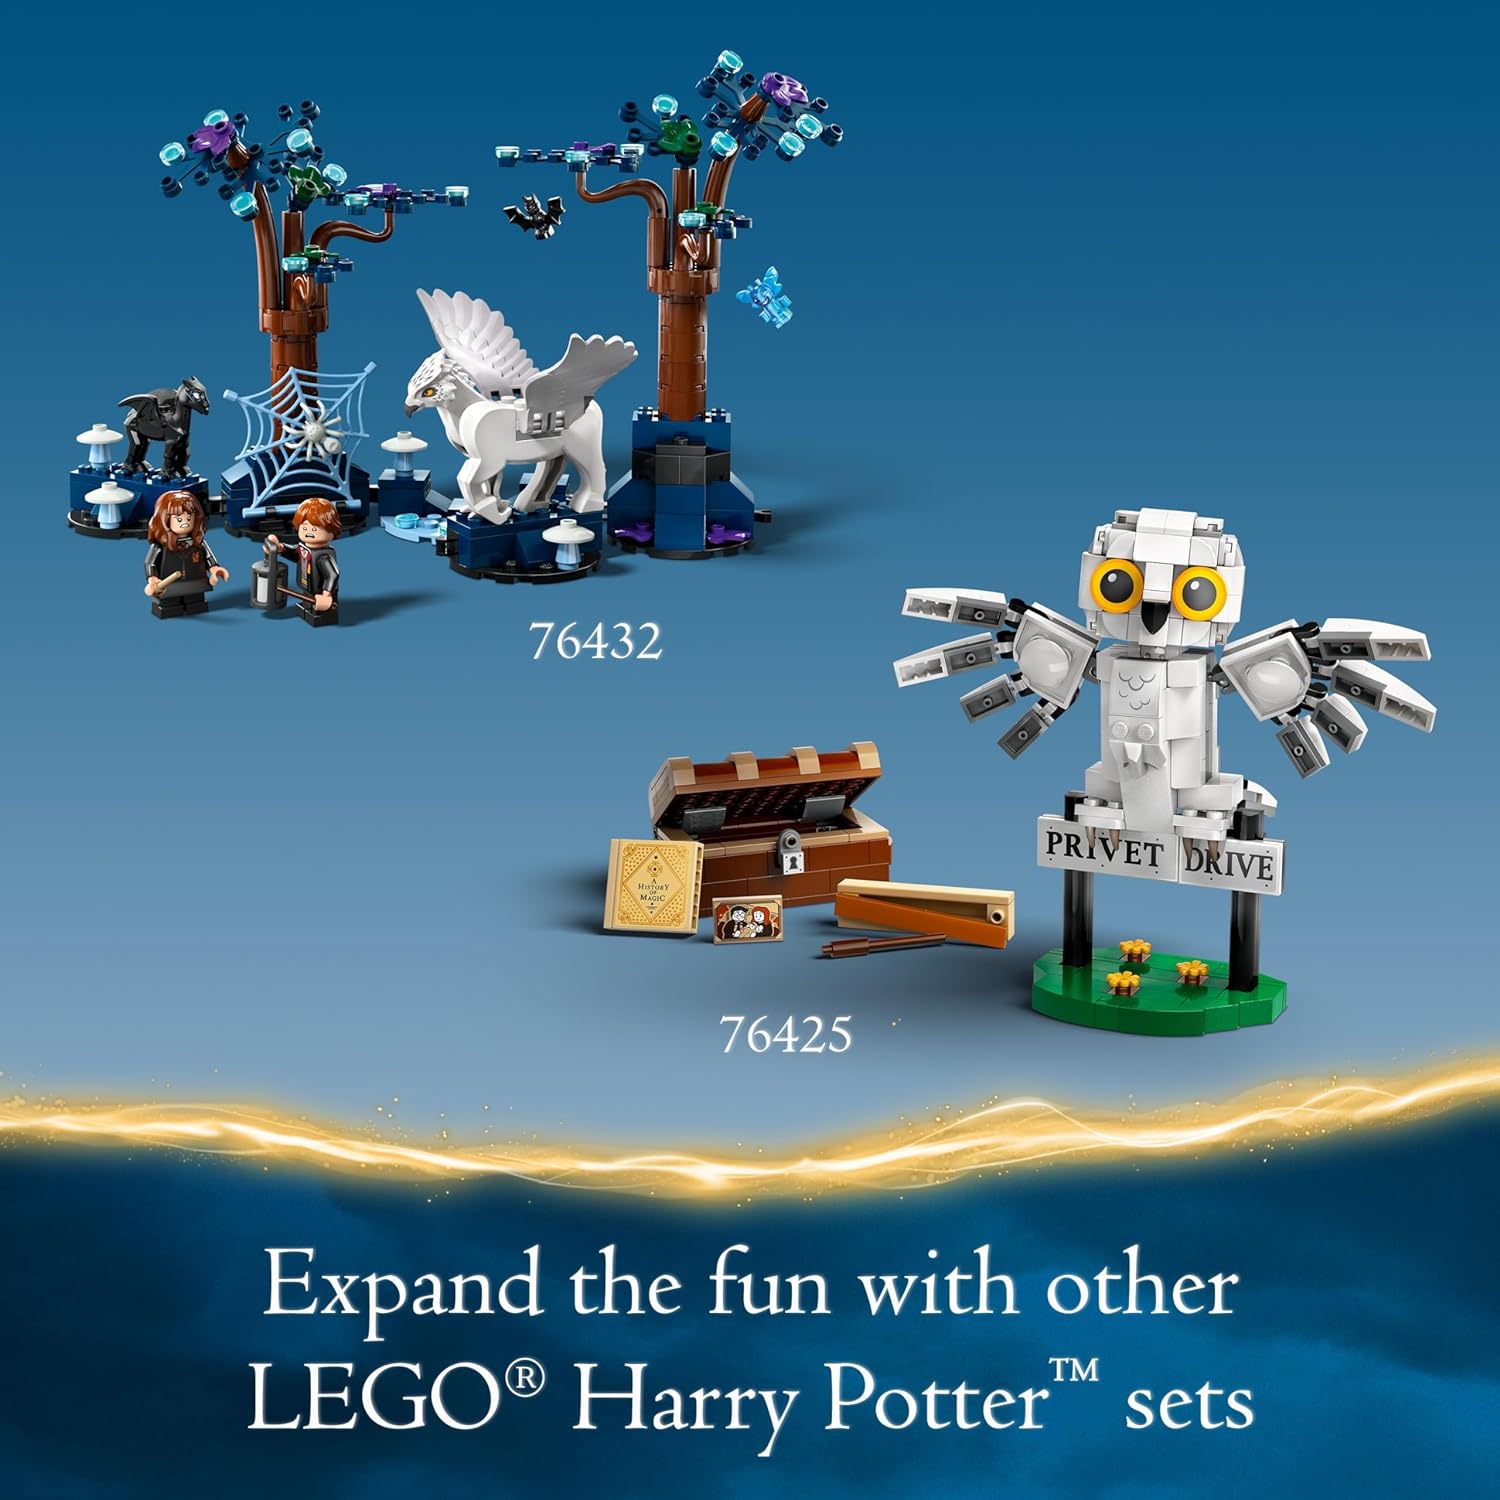 LEGO 76432 Harry Potter Forbidden Forest: Magical Creatures, Glow in The Dark Toy for Kids with Buckbeak and Thestral Fantasy Animal Figures.